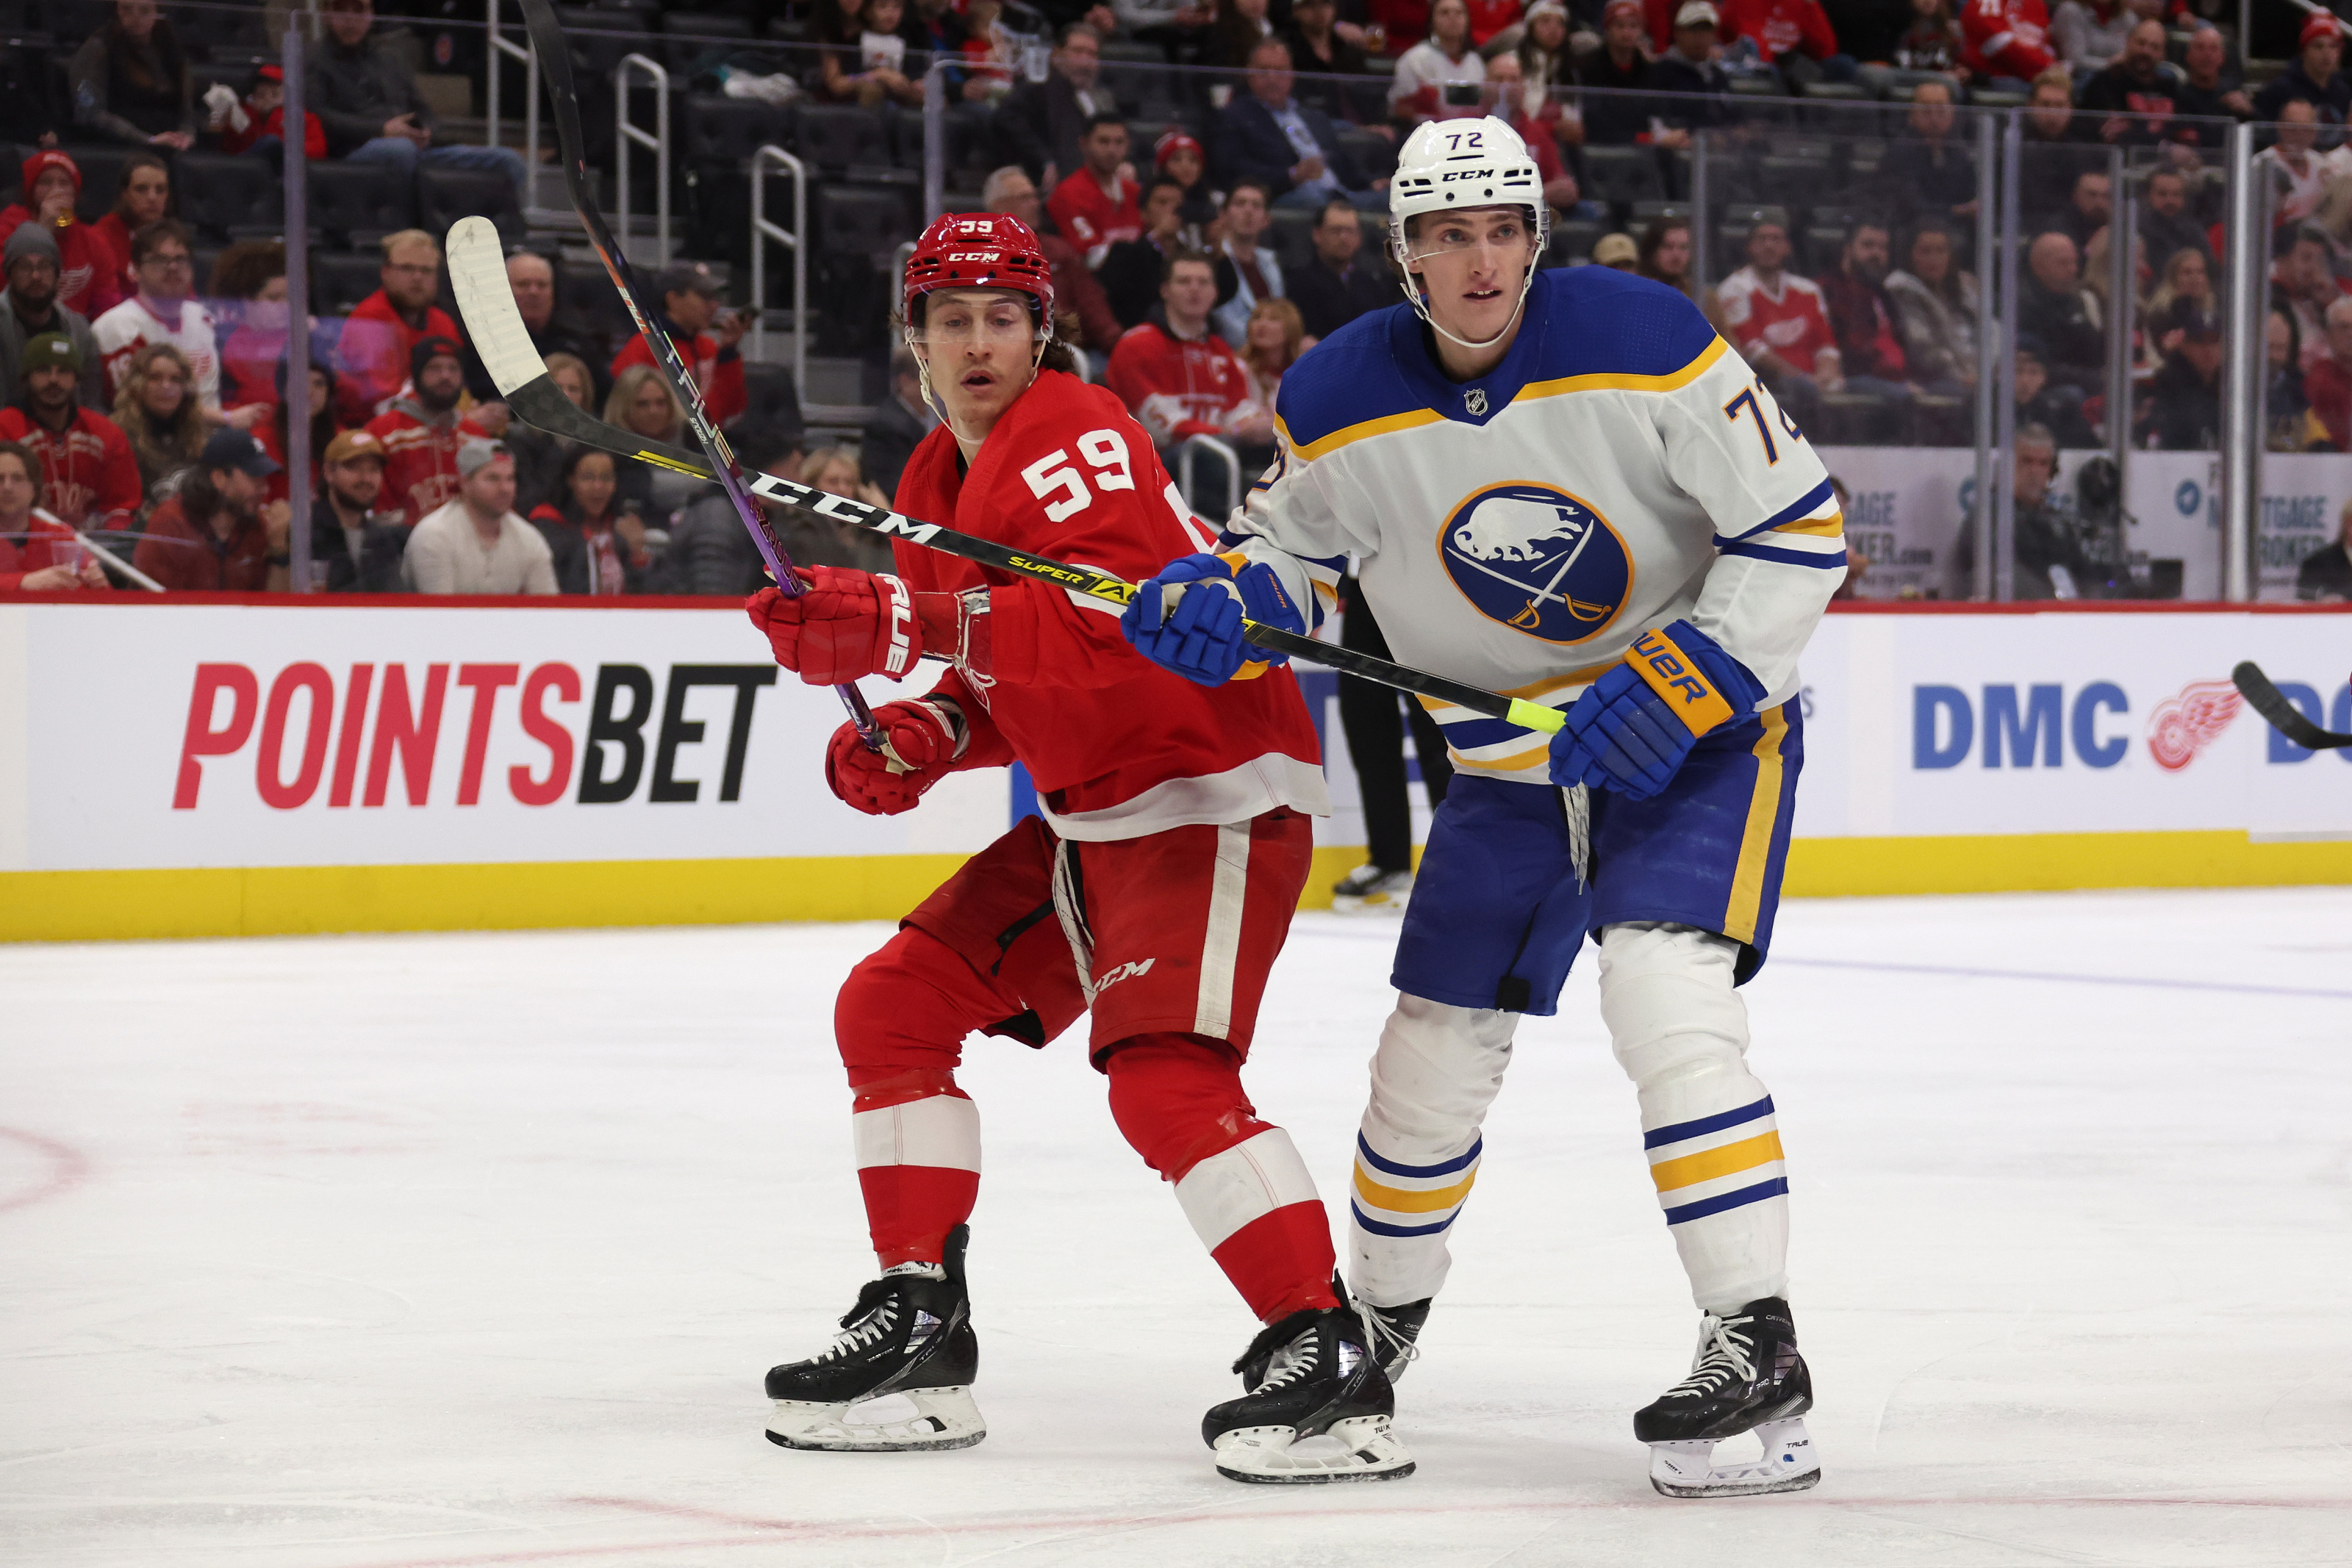 Detroit Red Wings: Ville Husso is exactly what Steve Yzerman needed